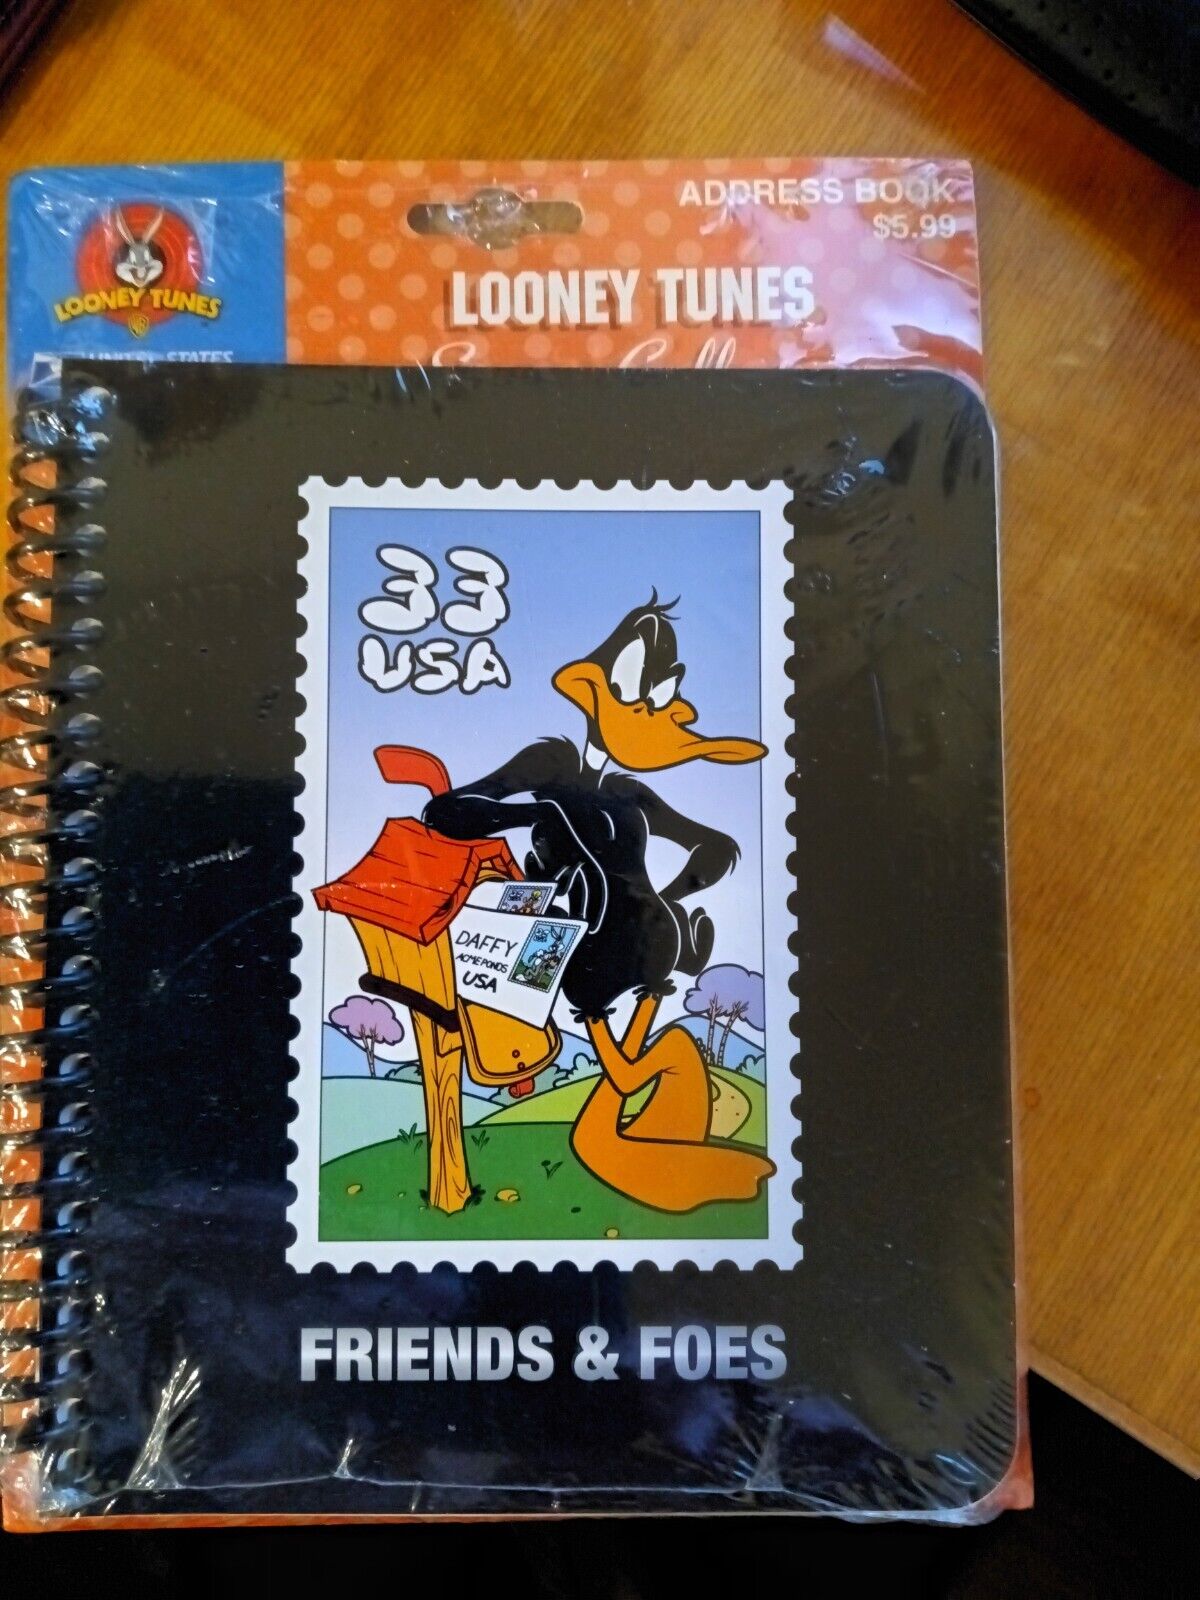 Vintage 1999 Looney Tunes Daffy Duck Spiral Hard Cover Address Book-Sealed